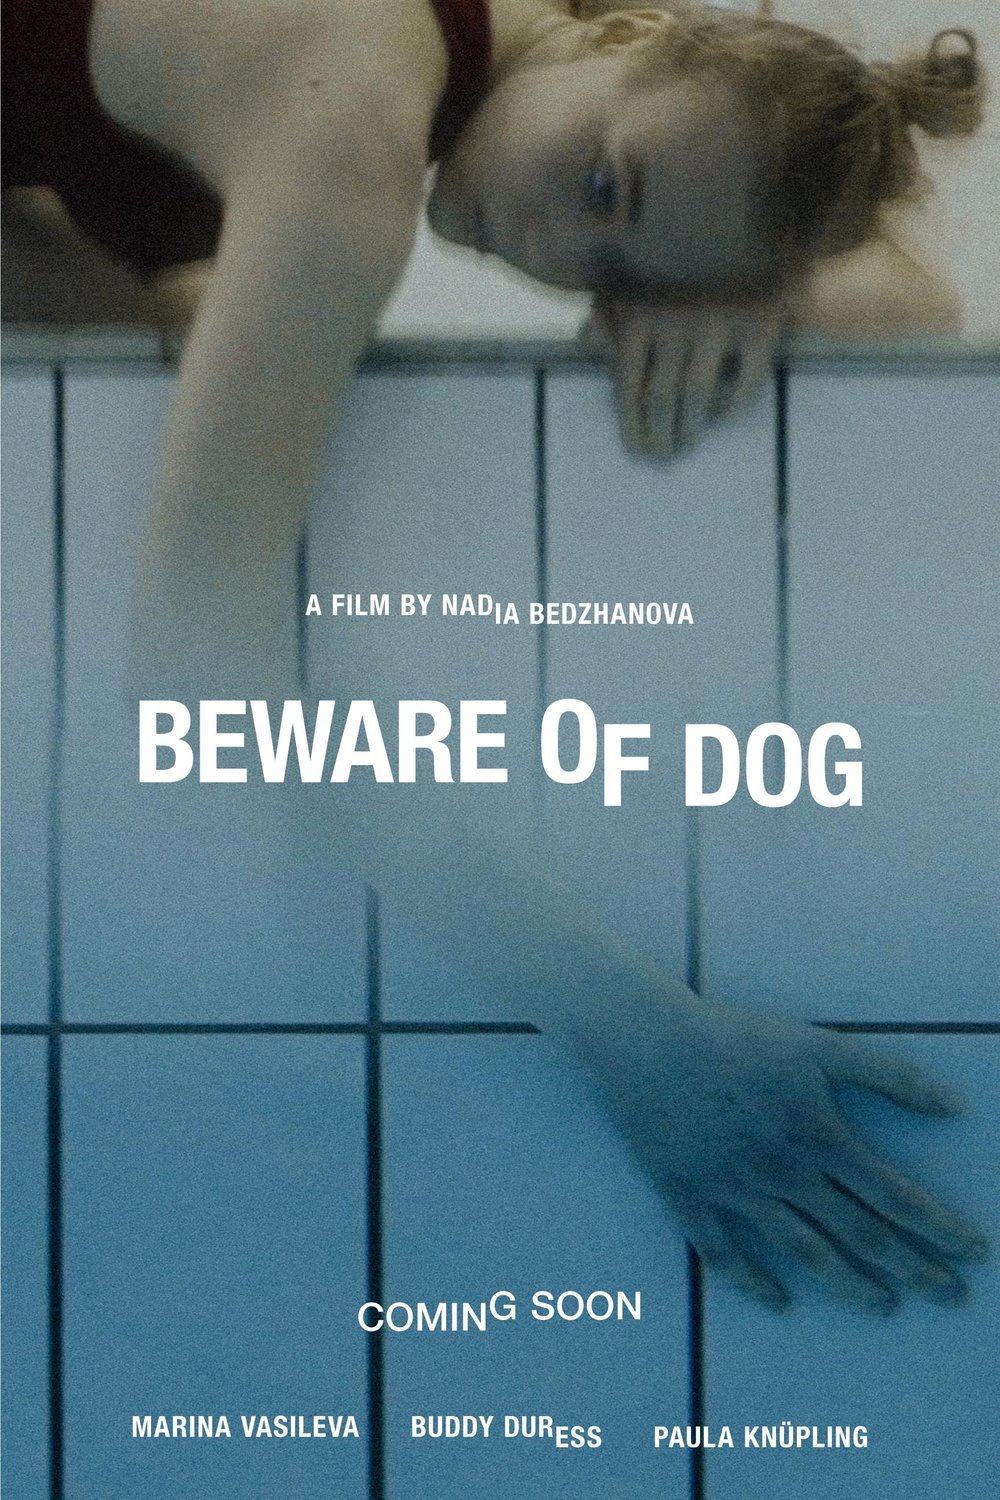 German poster of the movie Beware of Dog